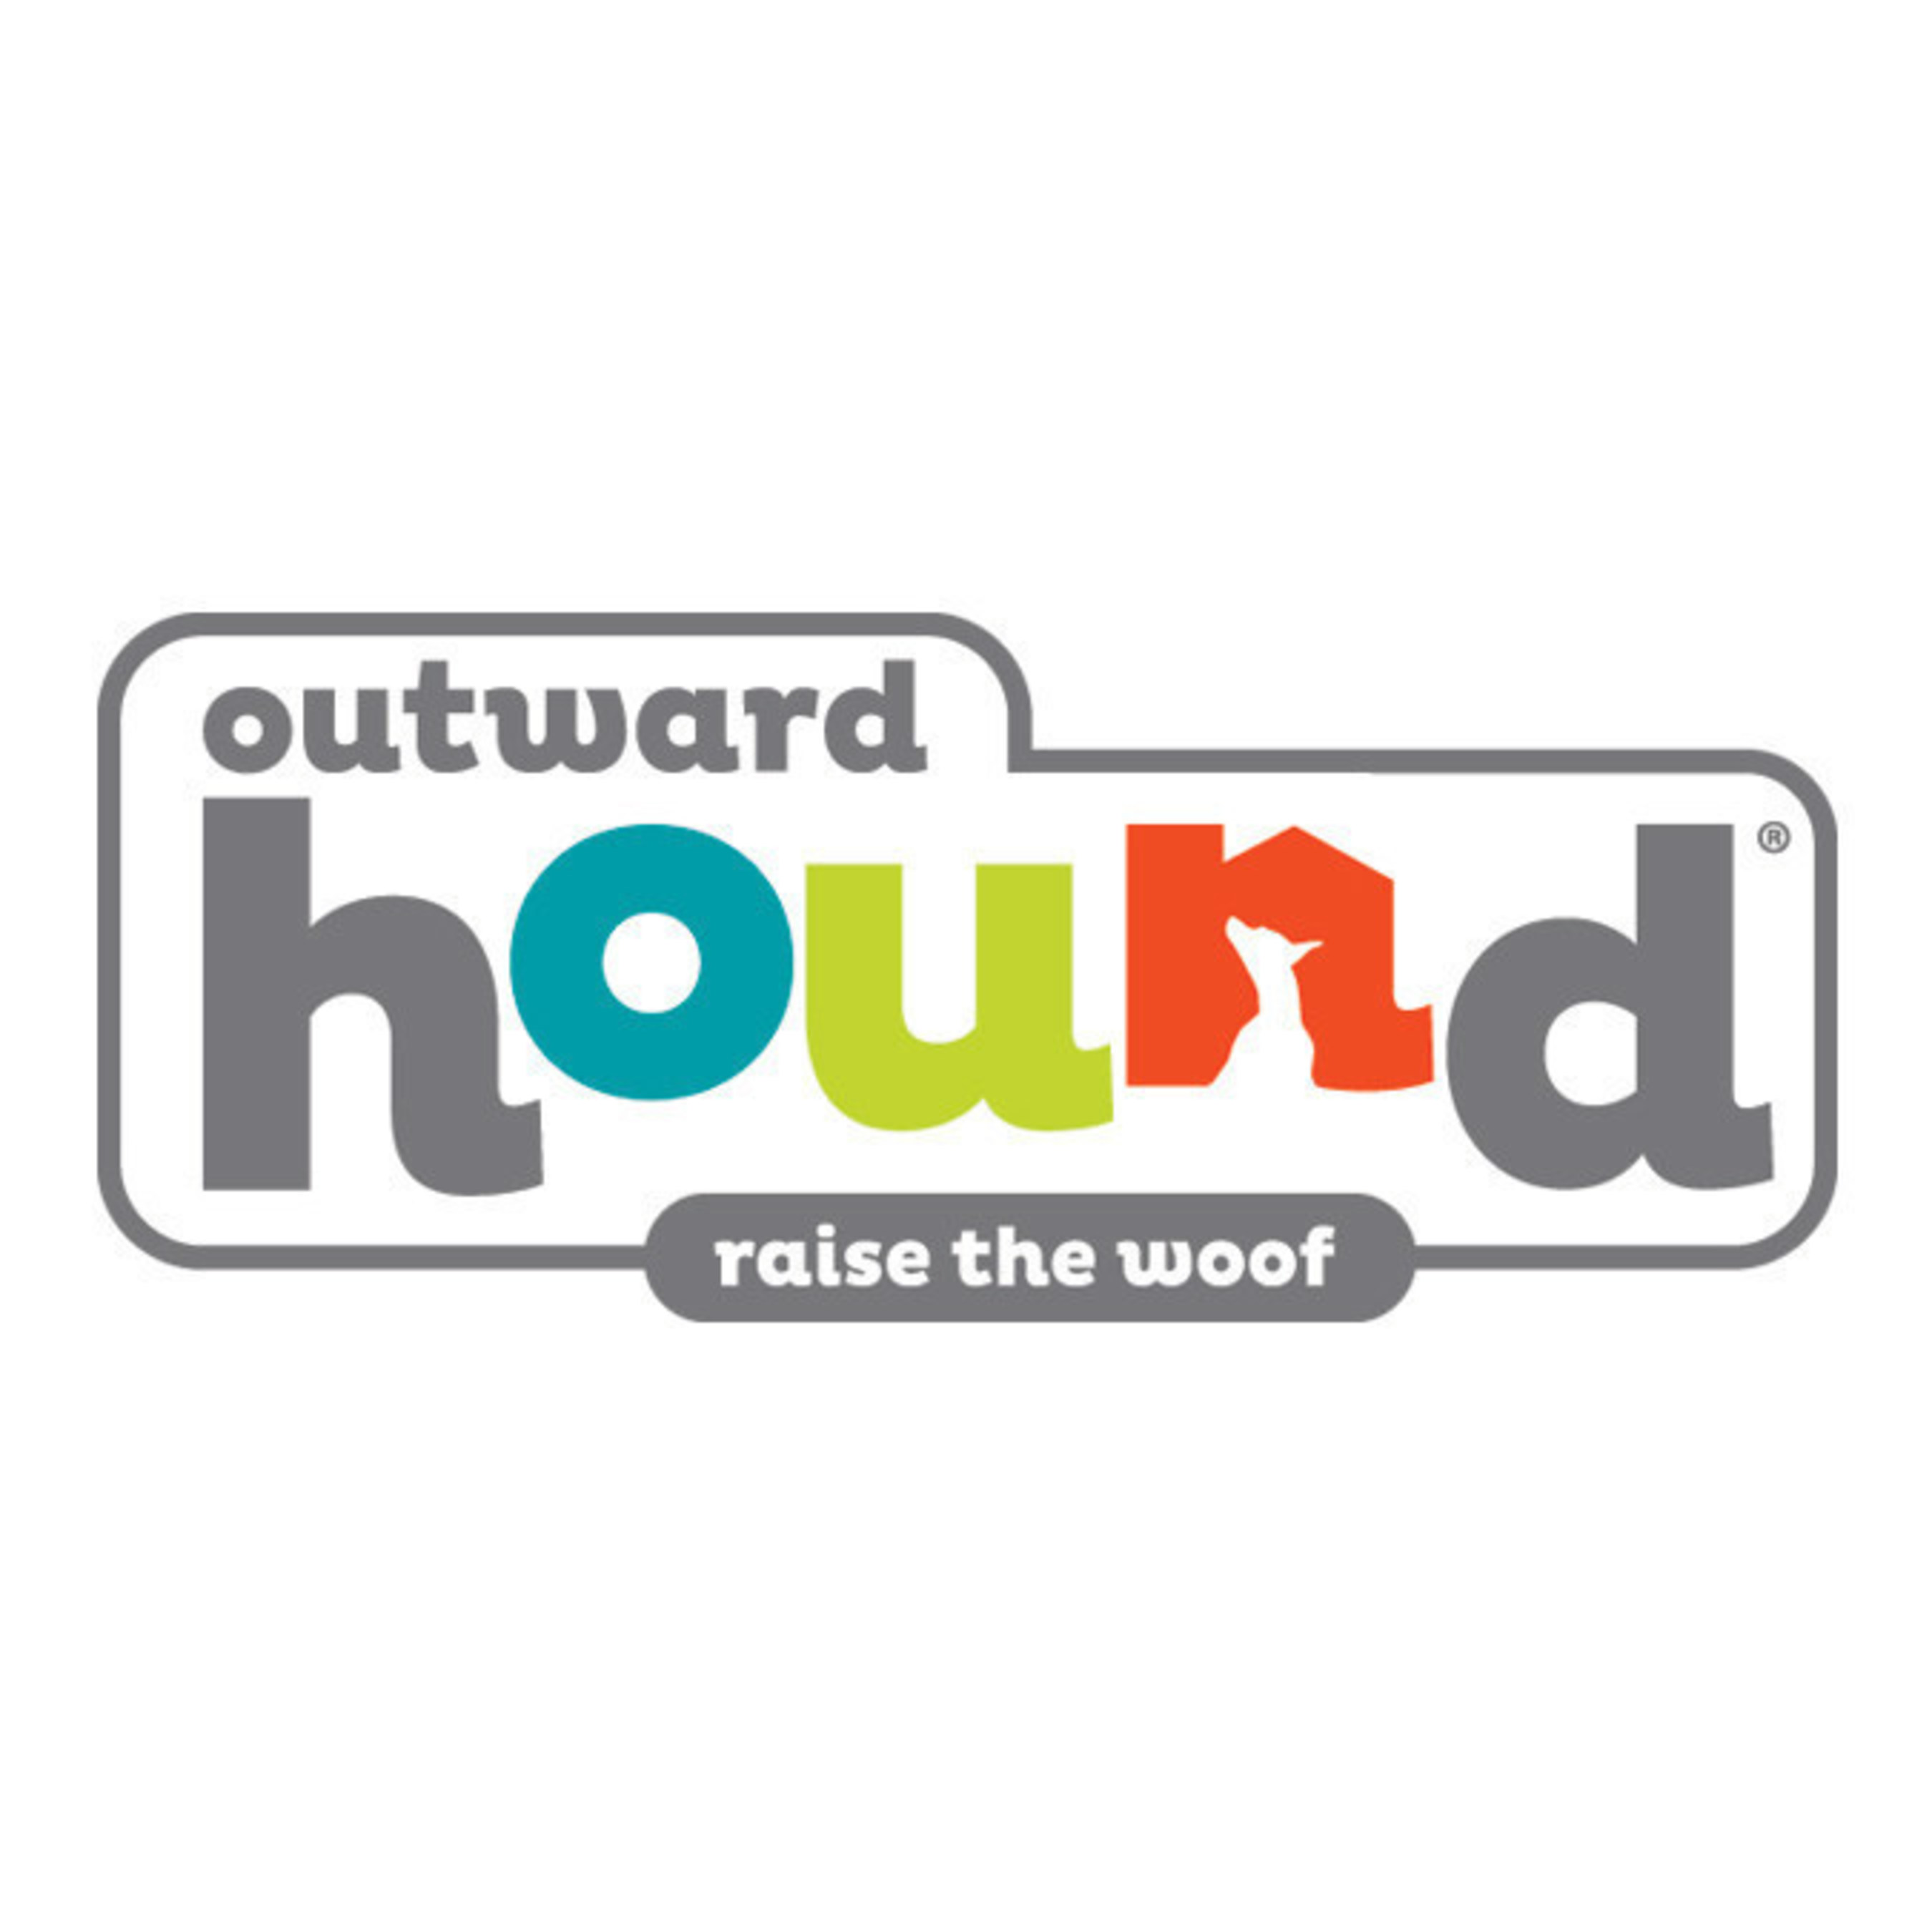 Furthering its mission to improve the lives of pet parents with meaningful innovations, Outward Hound(R) today announced that it has acquired award-winning pet product company Petstages(R).